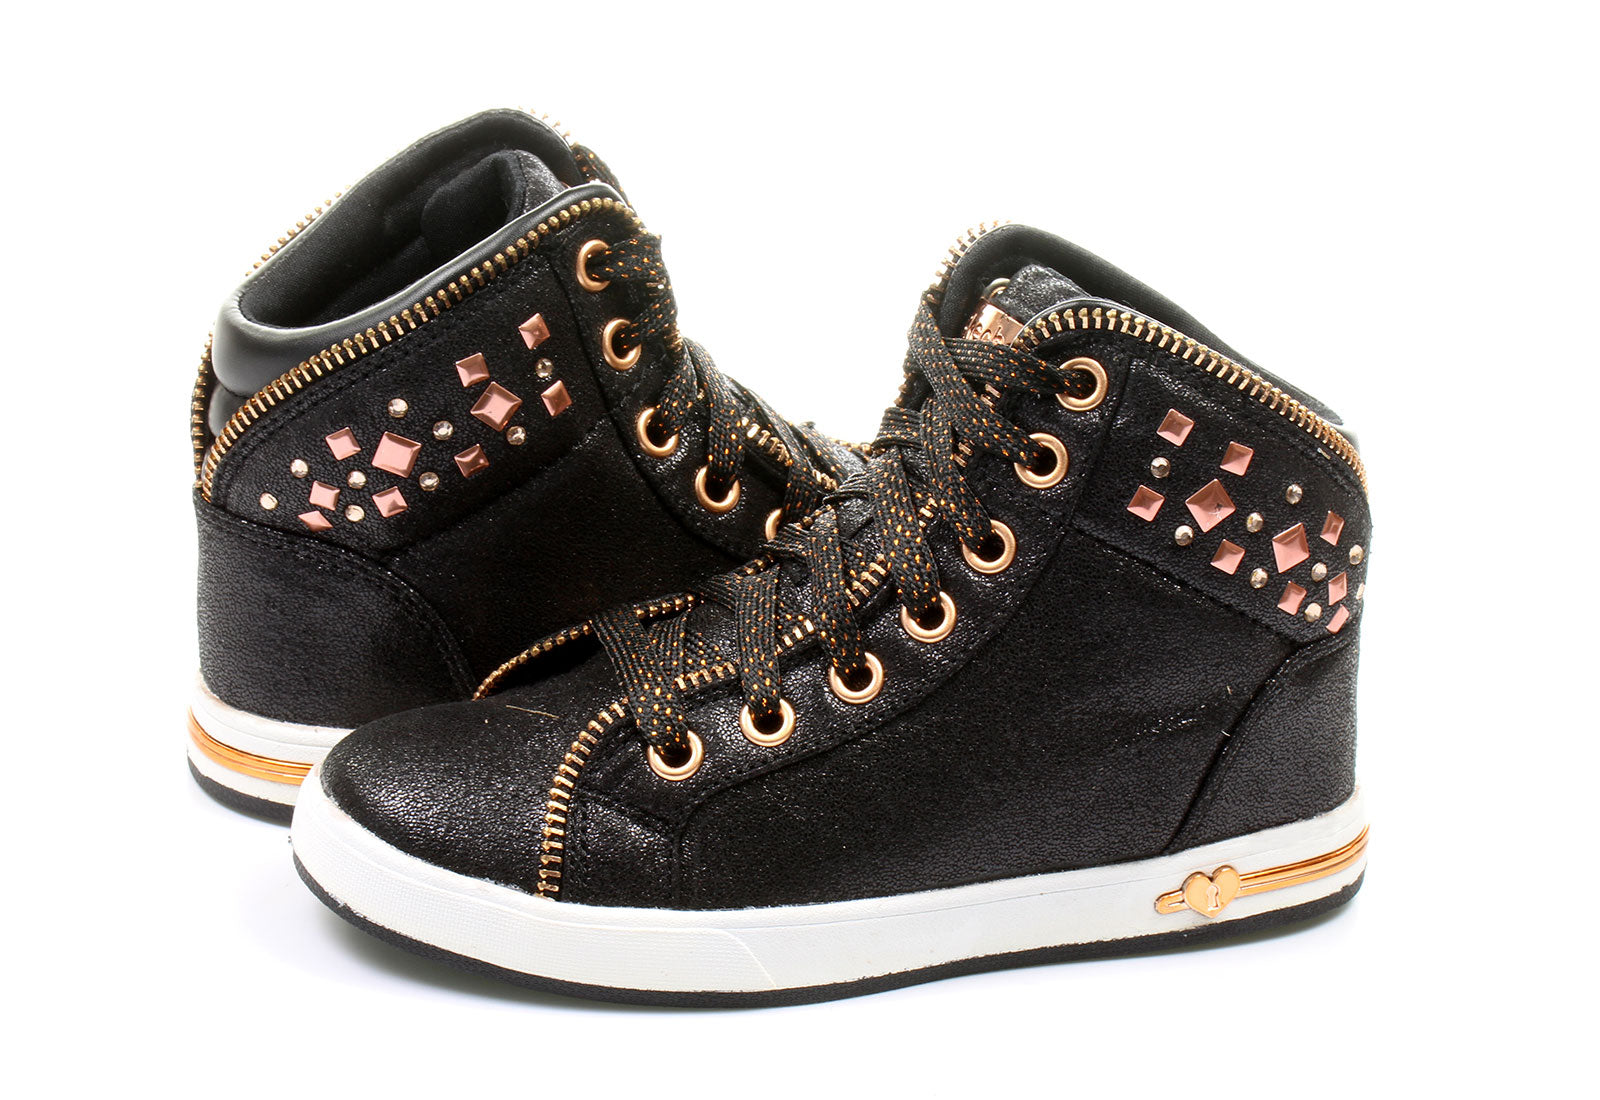 Skechers high top sneakers for girls Shoutouts Zipsters 84301L BKRG black-pink gold